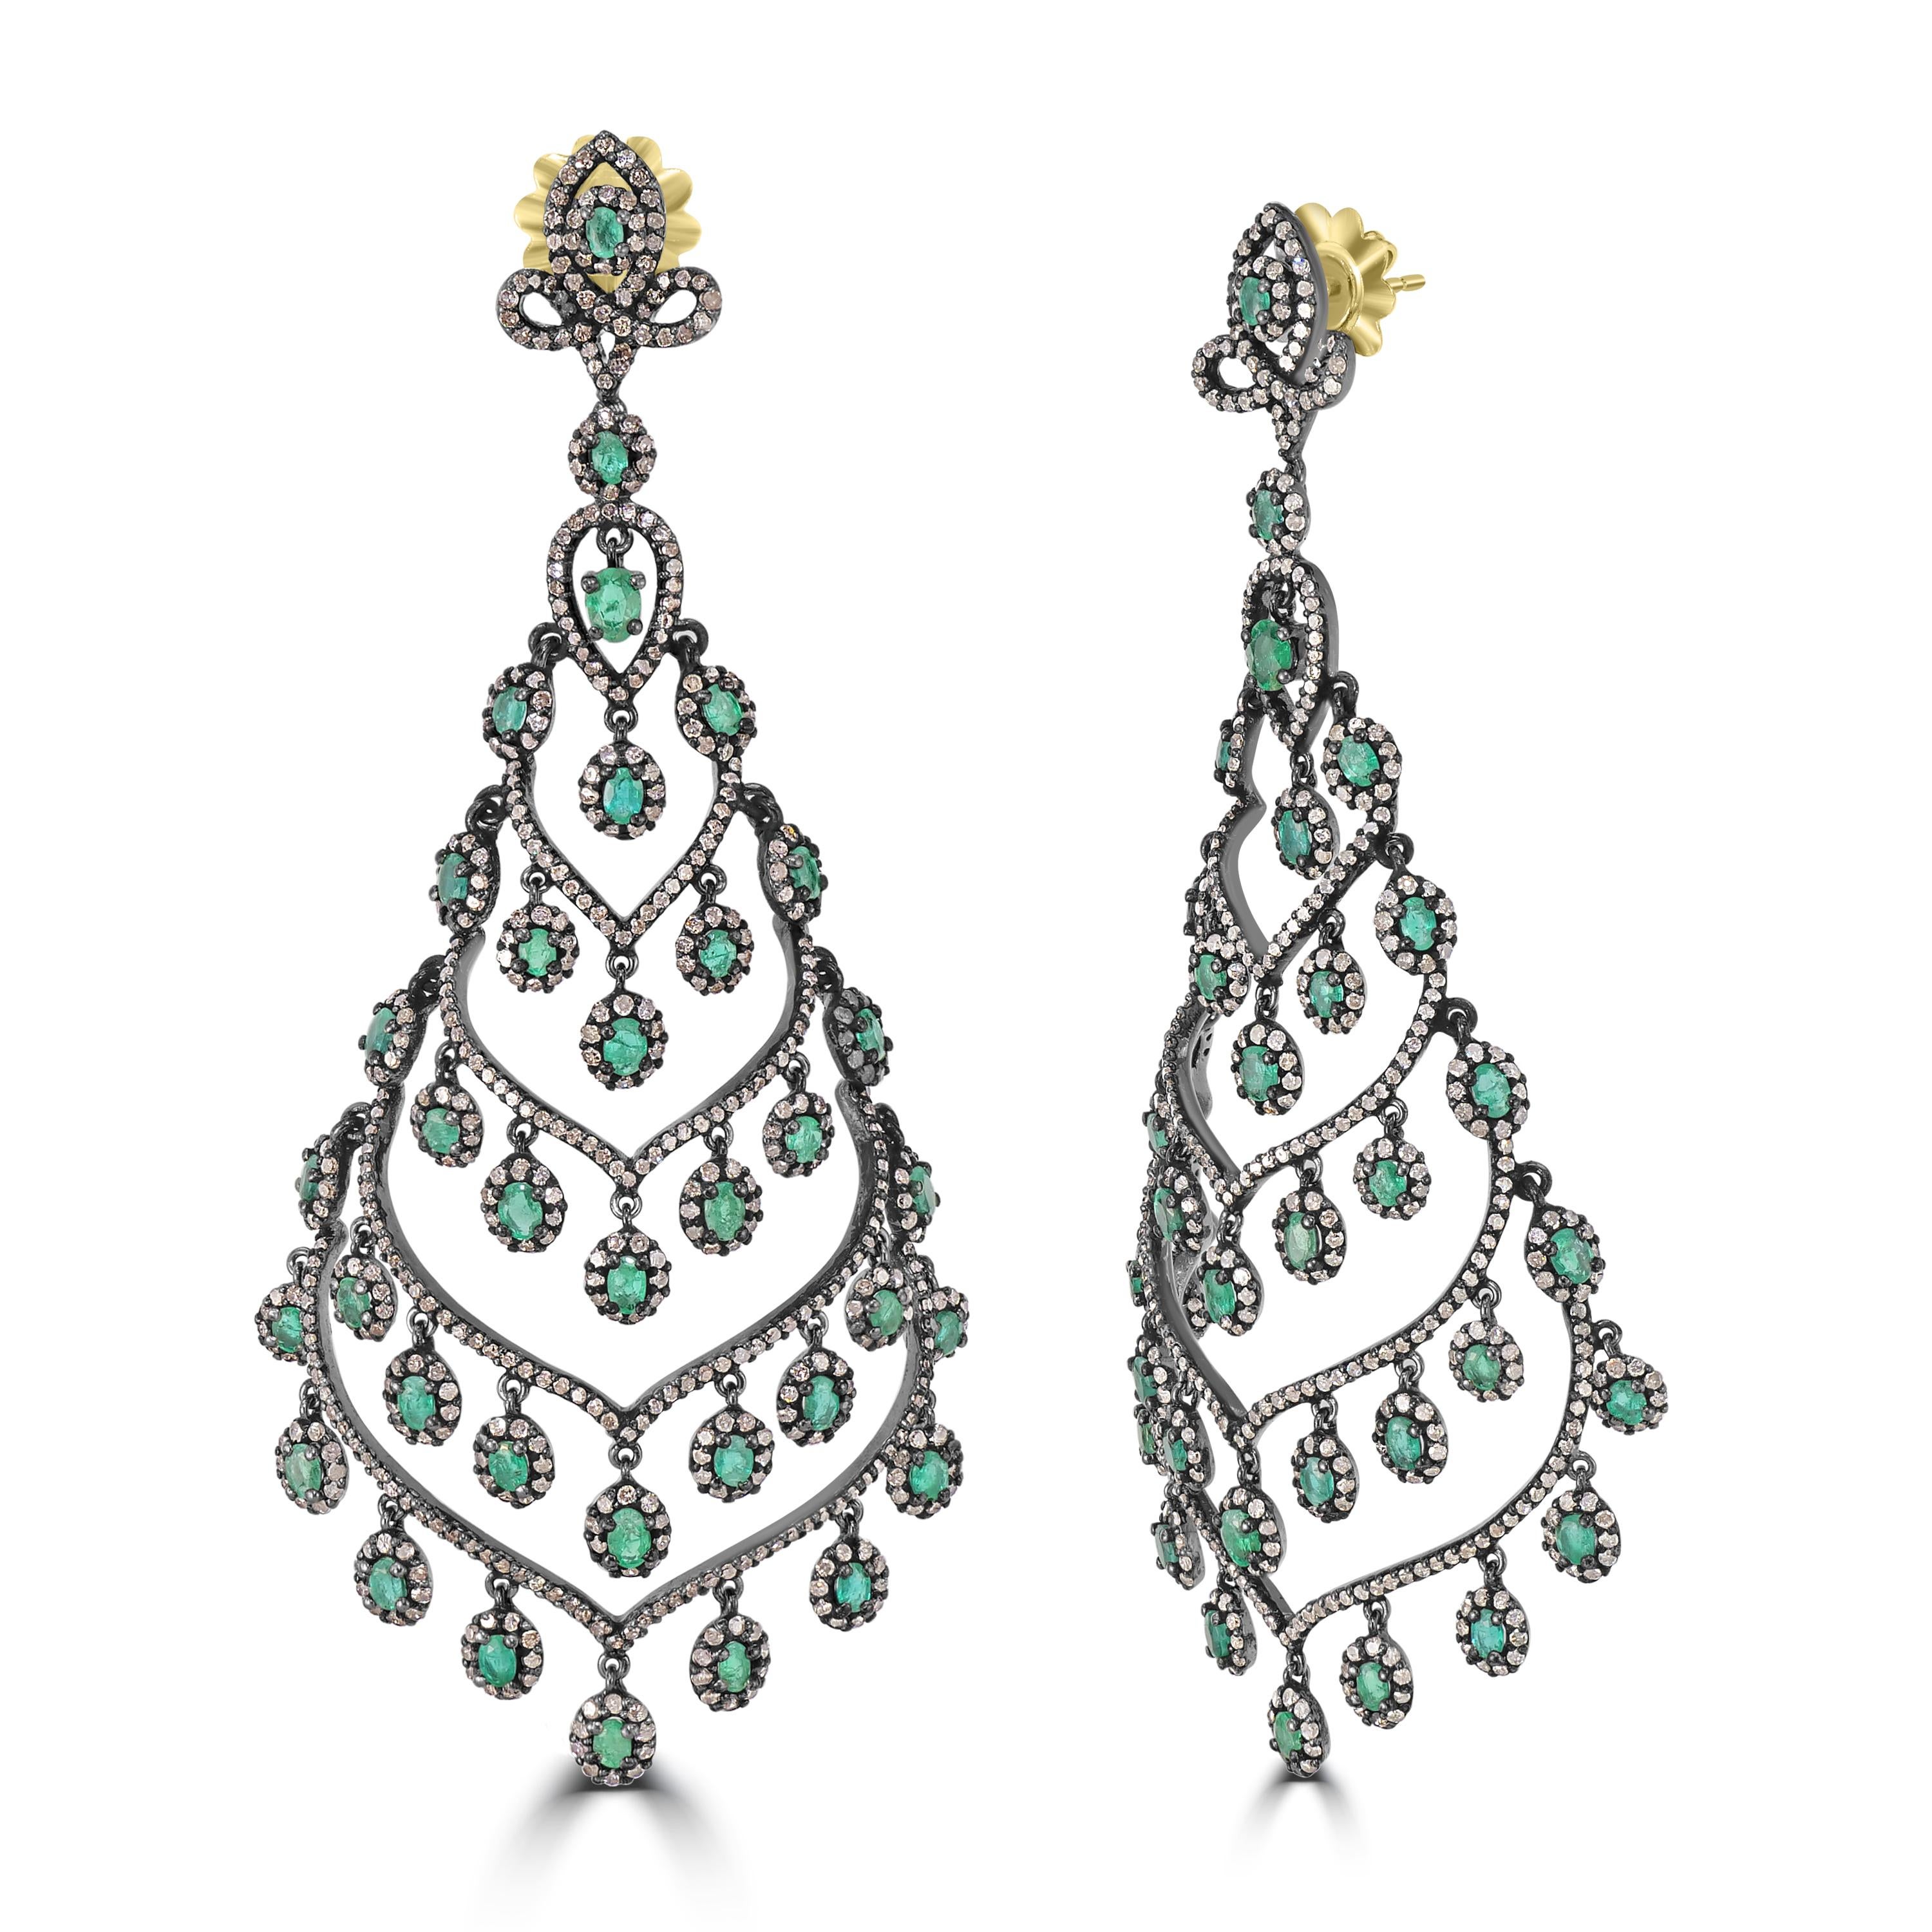 Introducing our Victorian 10.68 Cttw. Emerald and Diamond Chandelier Earrings – a breathtaking blend of elegance, sophistication, and timeless beauty.

Crafted with meticulous attention to detail, these chandelier earrings feature an exquisite